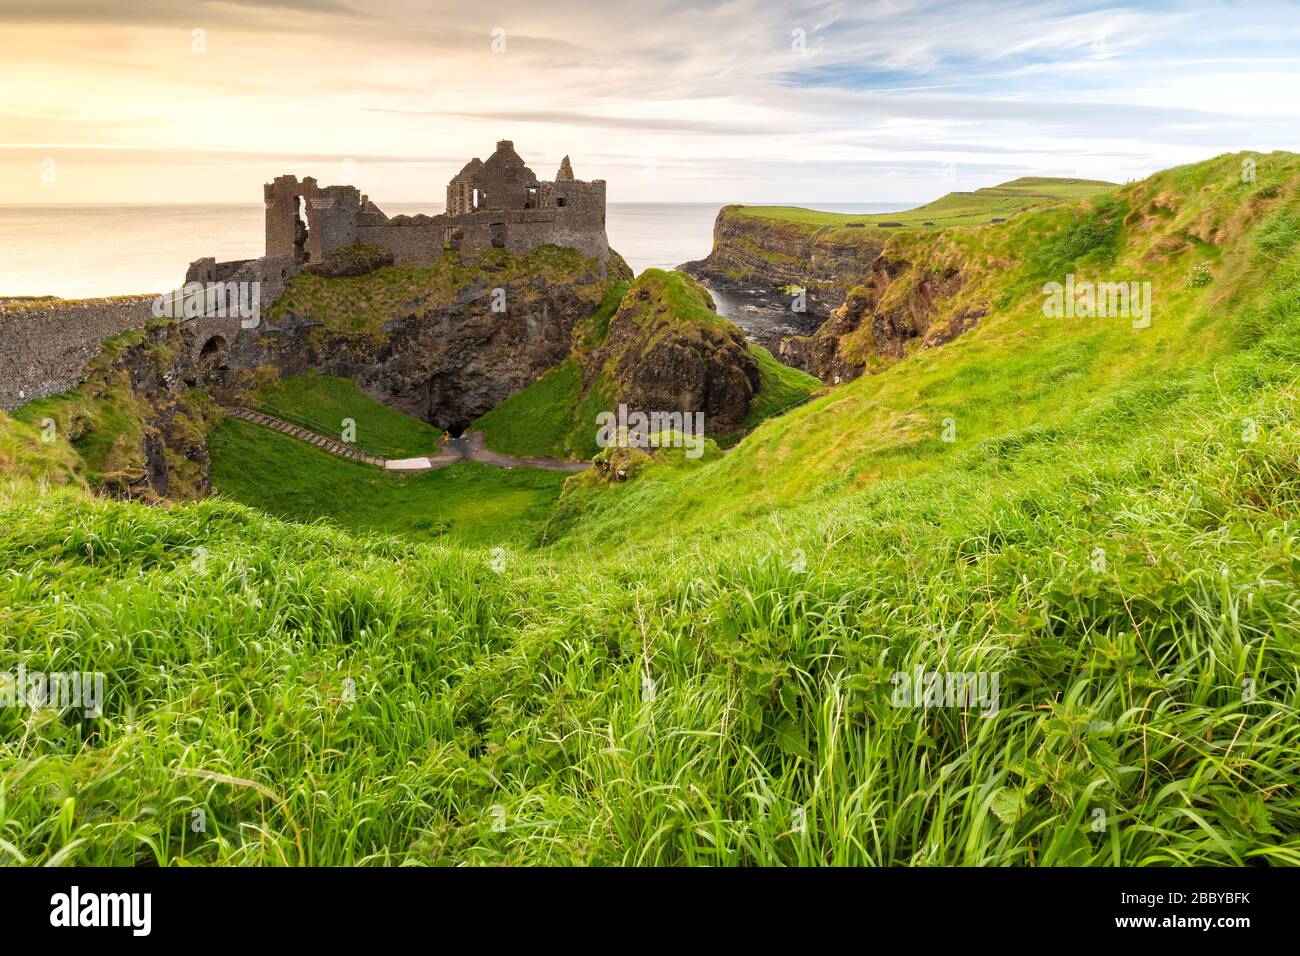 View of the ruins of the Dunluce Castle. Bushmills, County Antrim, Ulster region, Northern Ireland, United Kingdom. Stock Photo